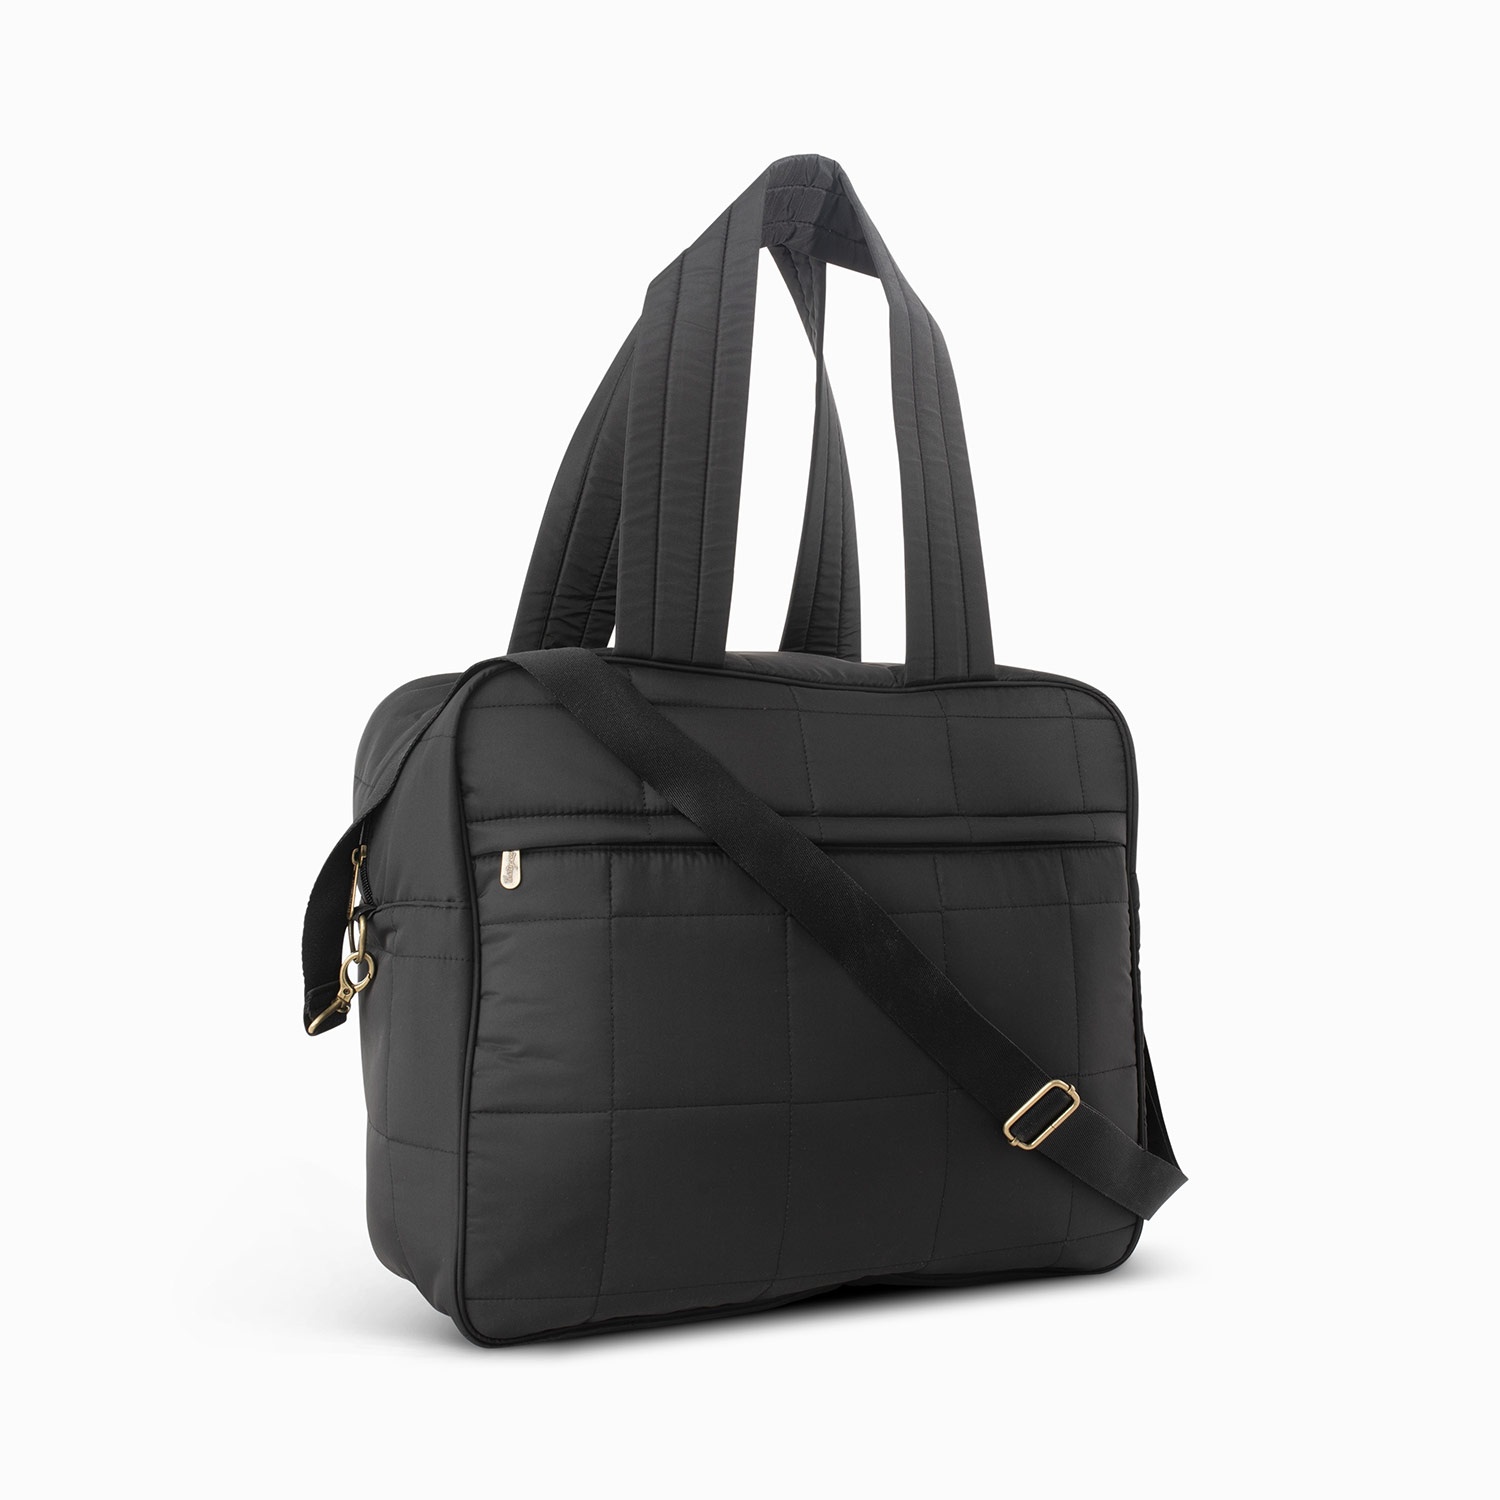 Voyager large tote